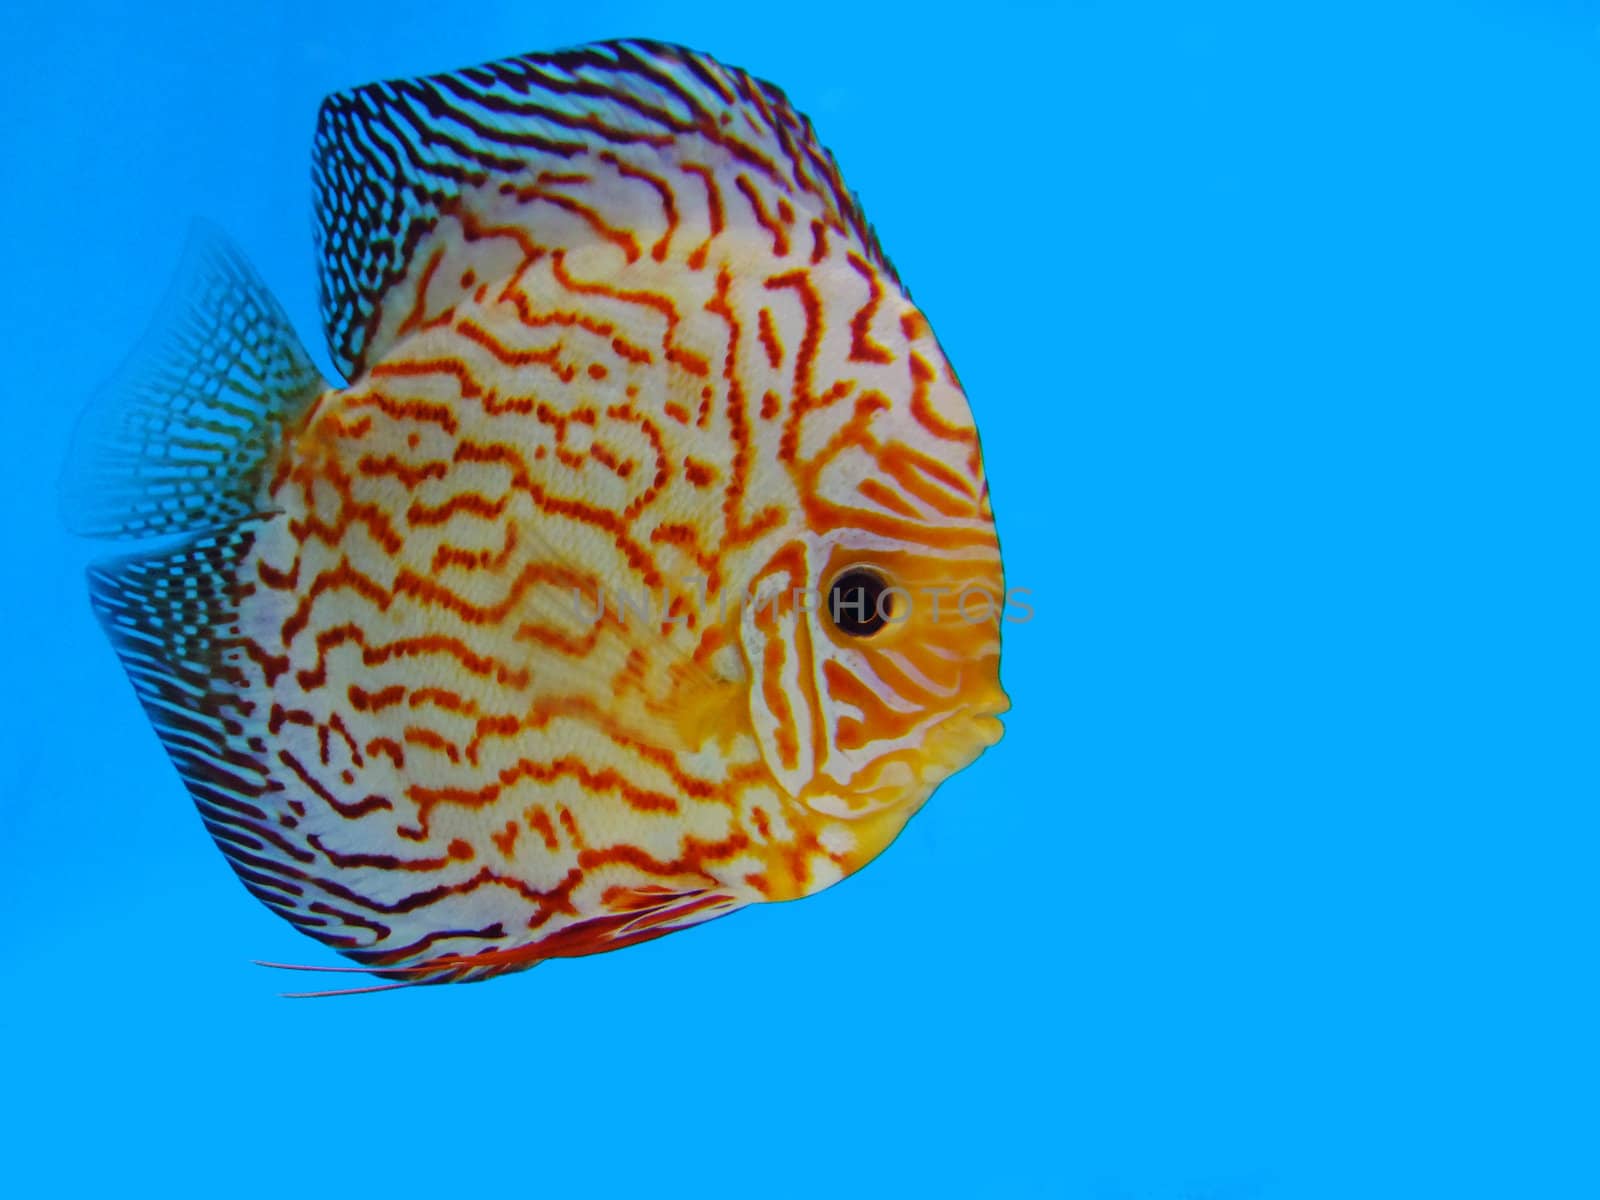 discus fish by gracethang